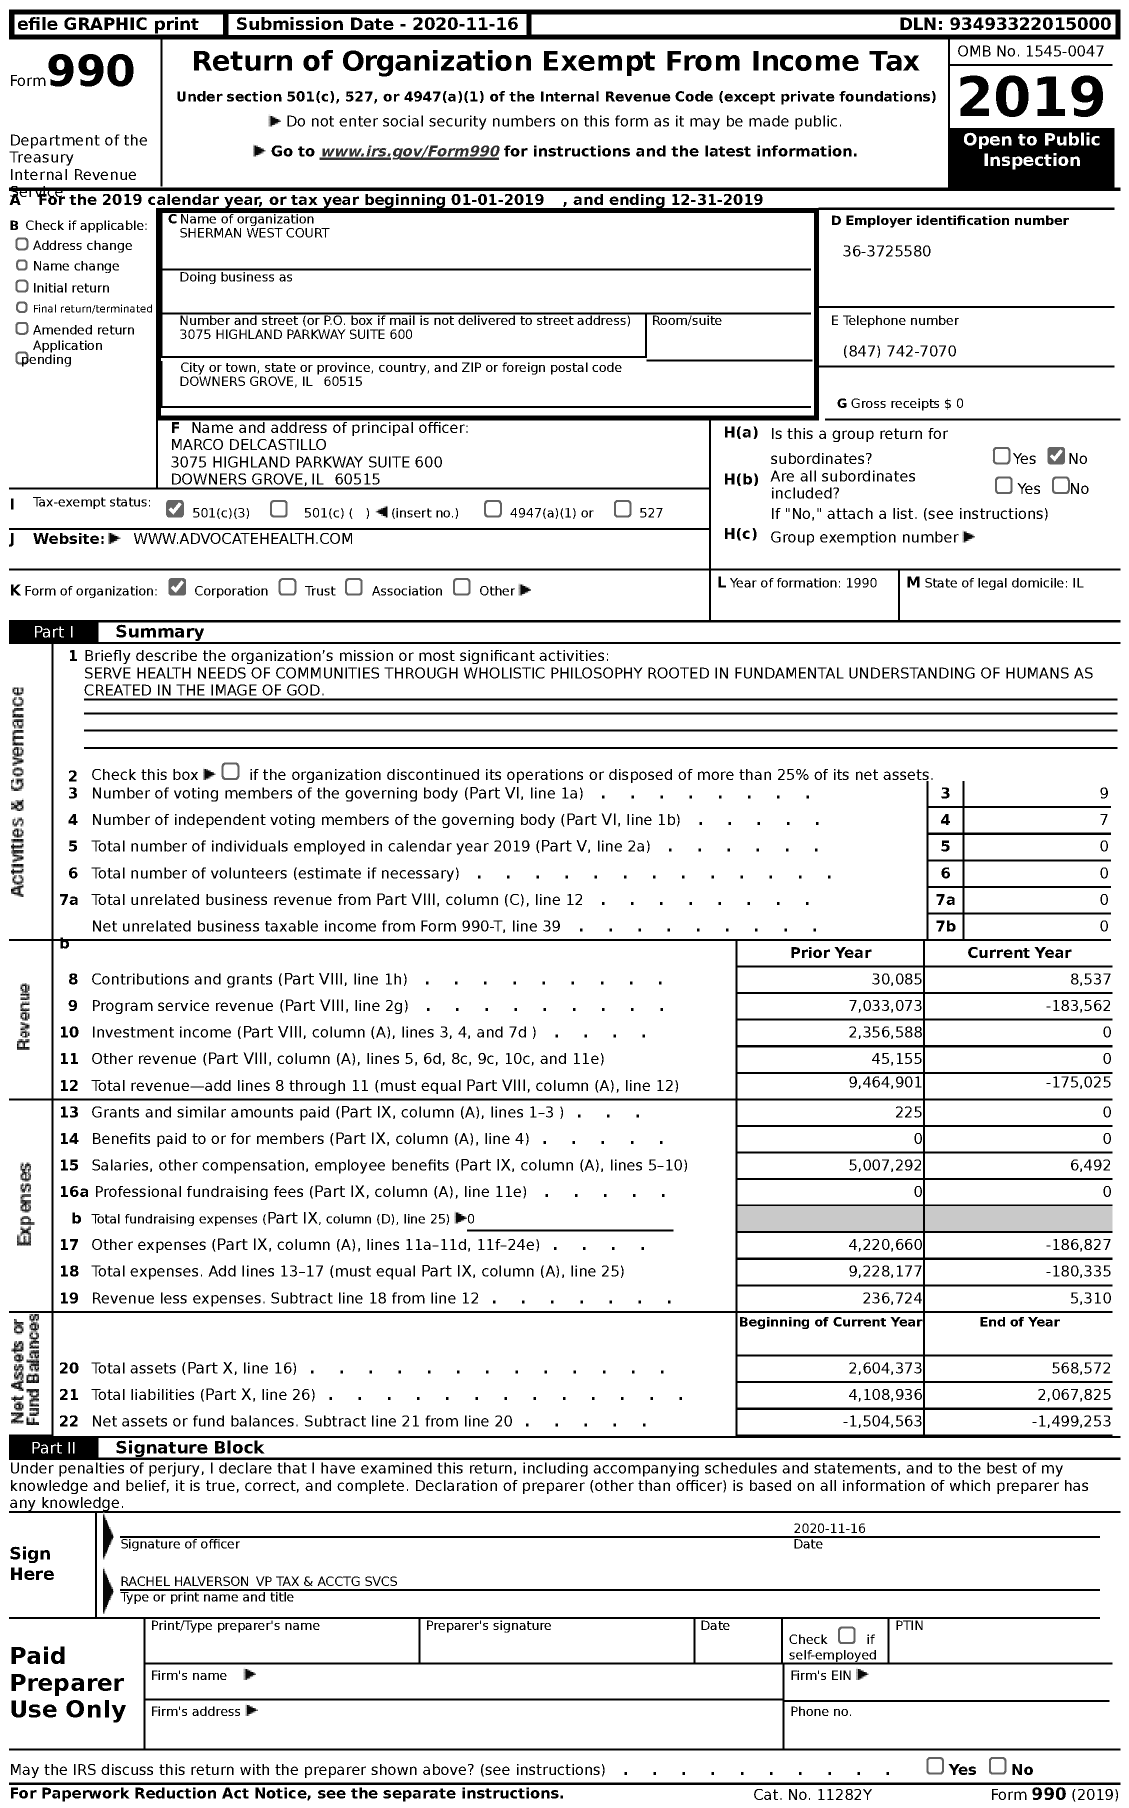 Image of first page of 2019 Form 990 for Sherman West Court